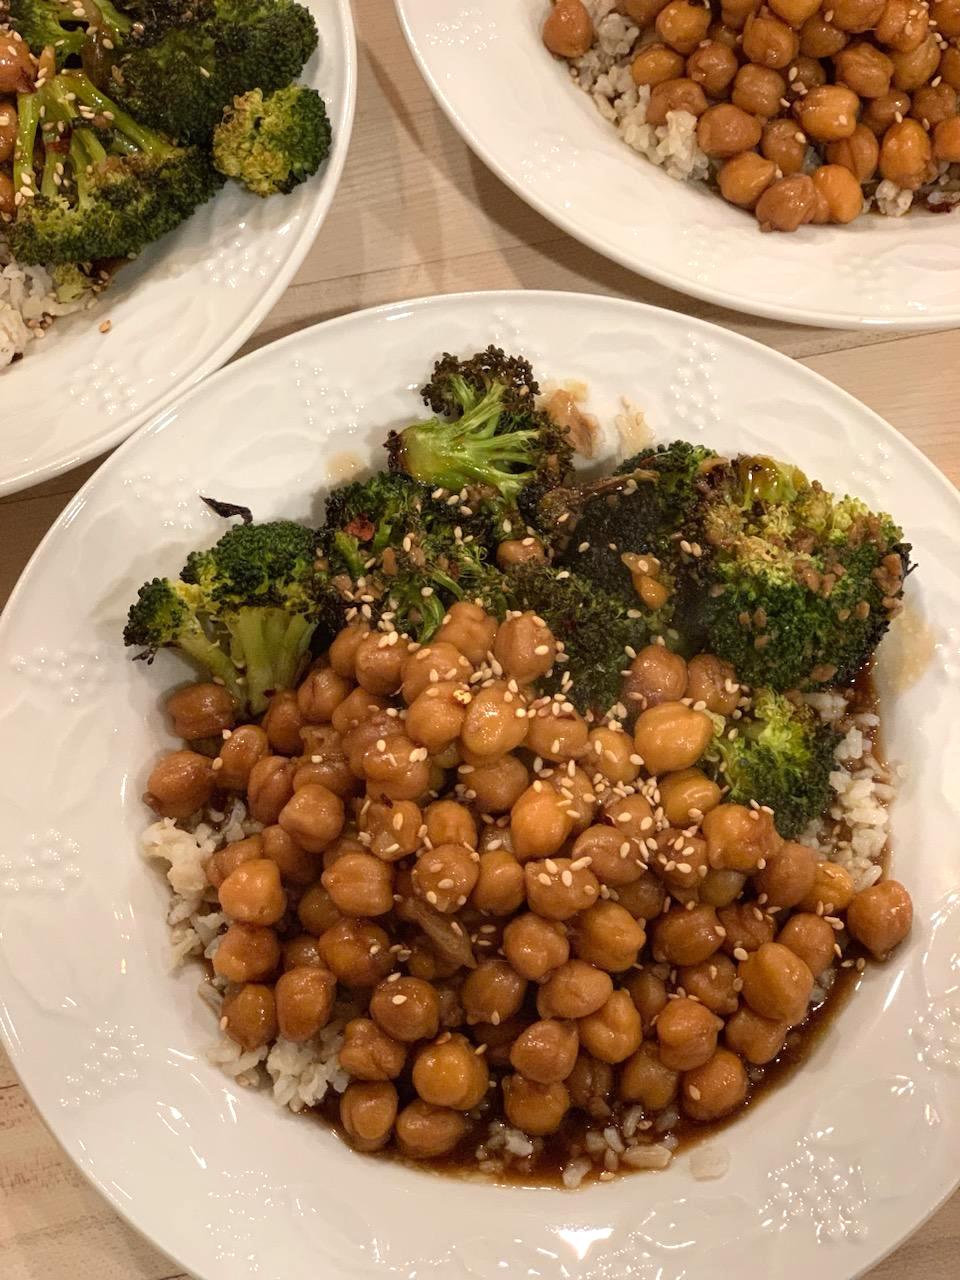 Broccoli and Chickpeas in Garlic Sauce